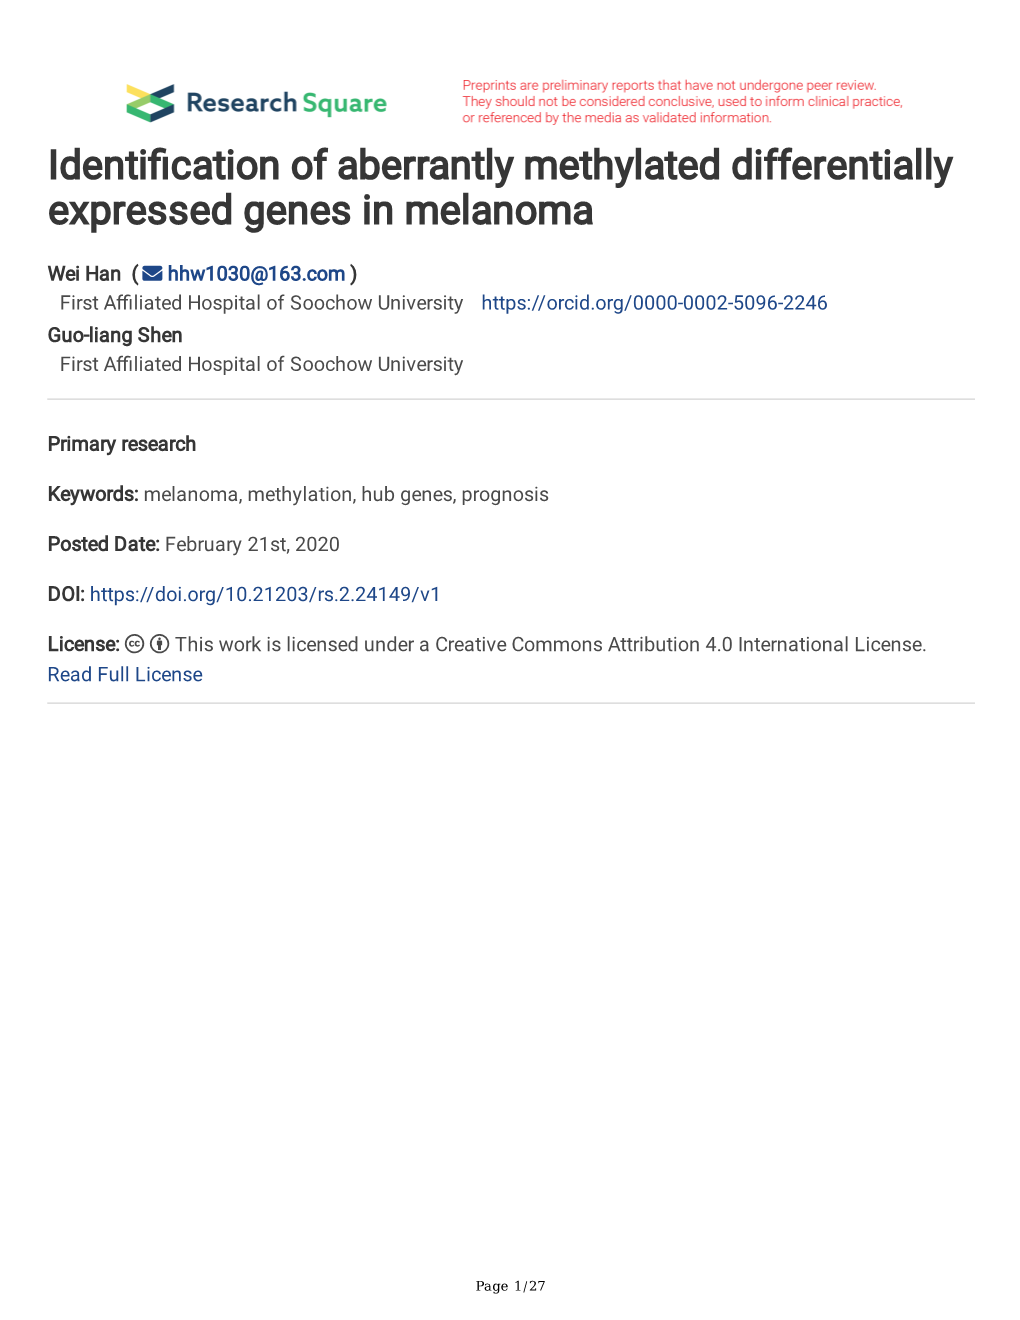 Identification of Aberrantly Methylated Differentially Expressed Genes In